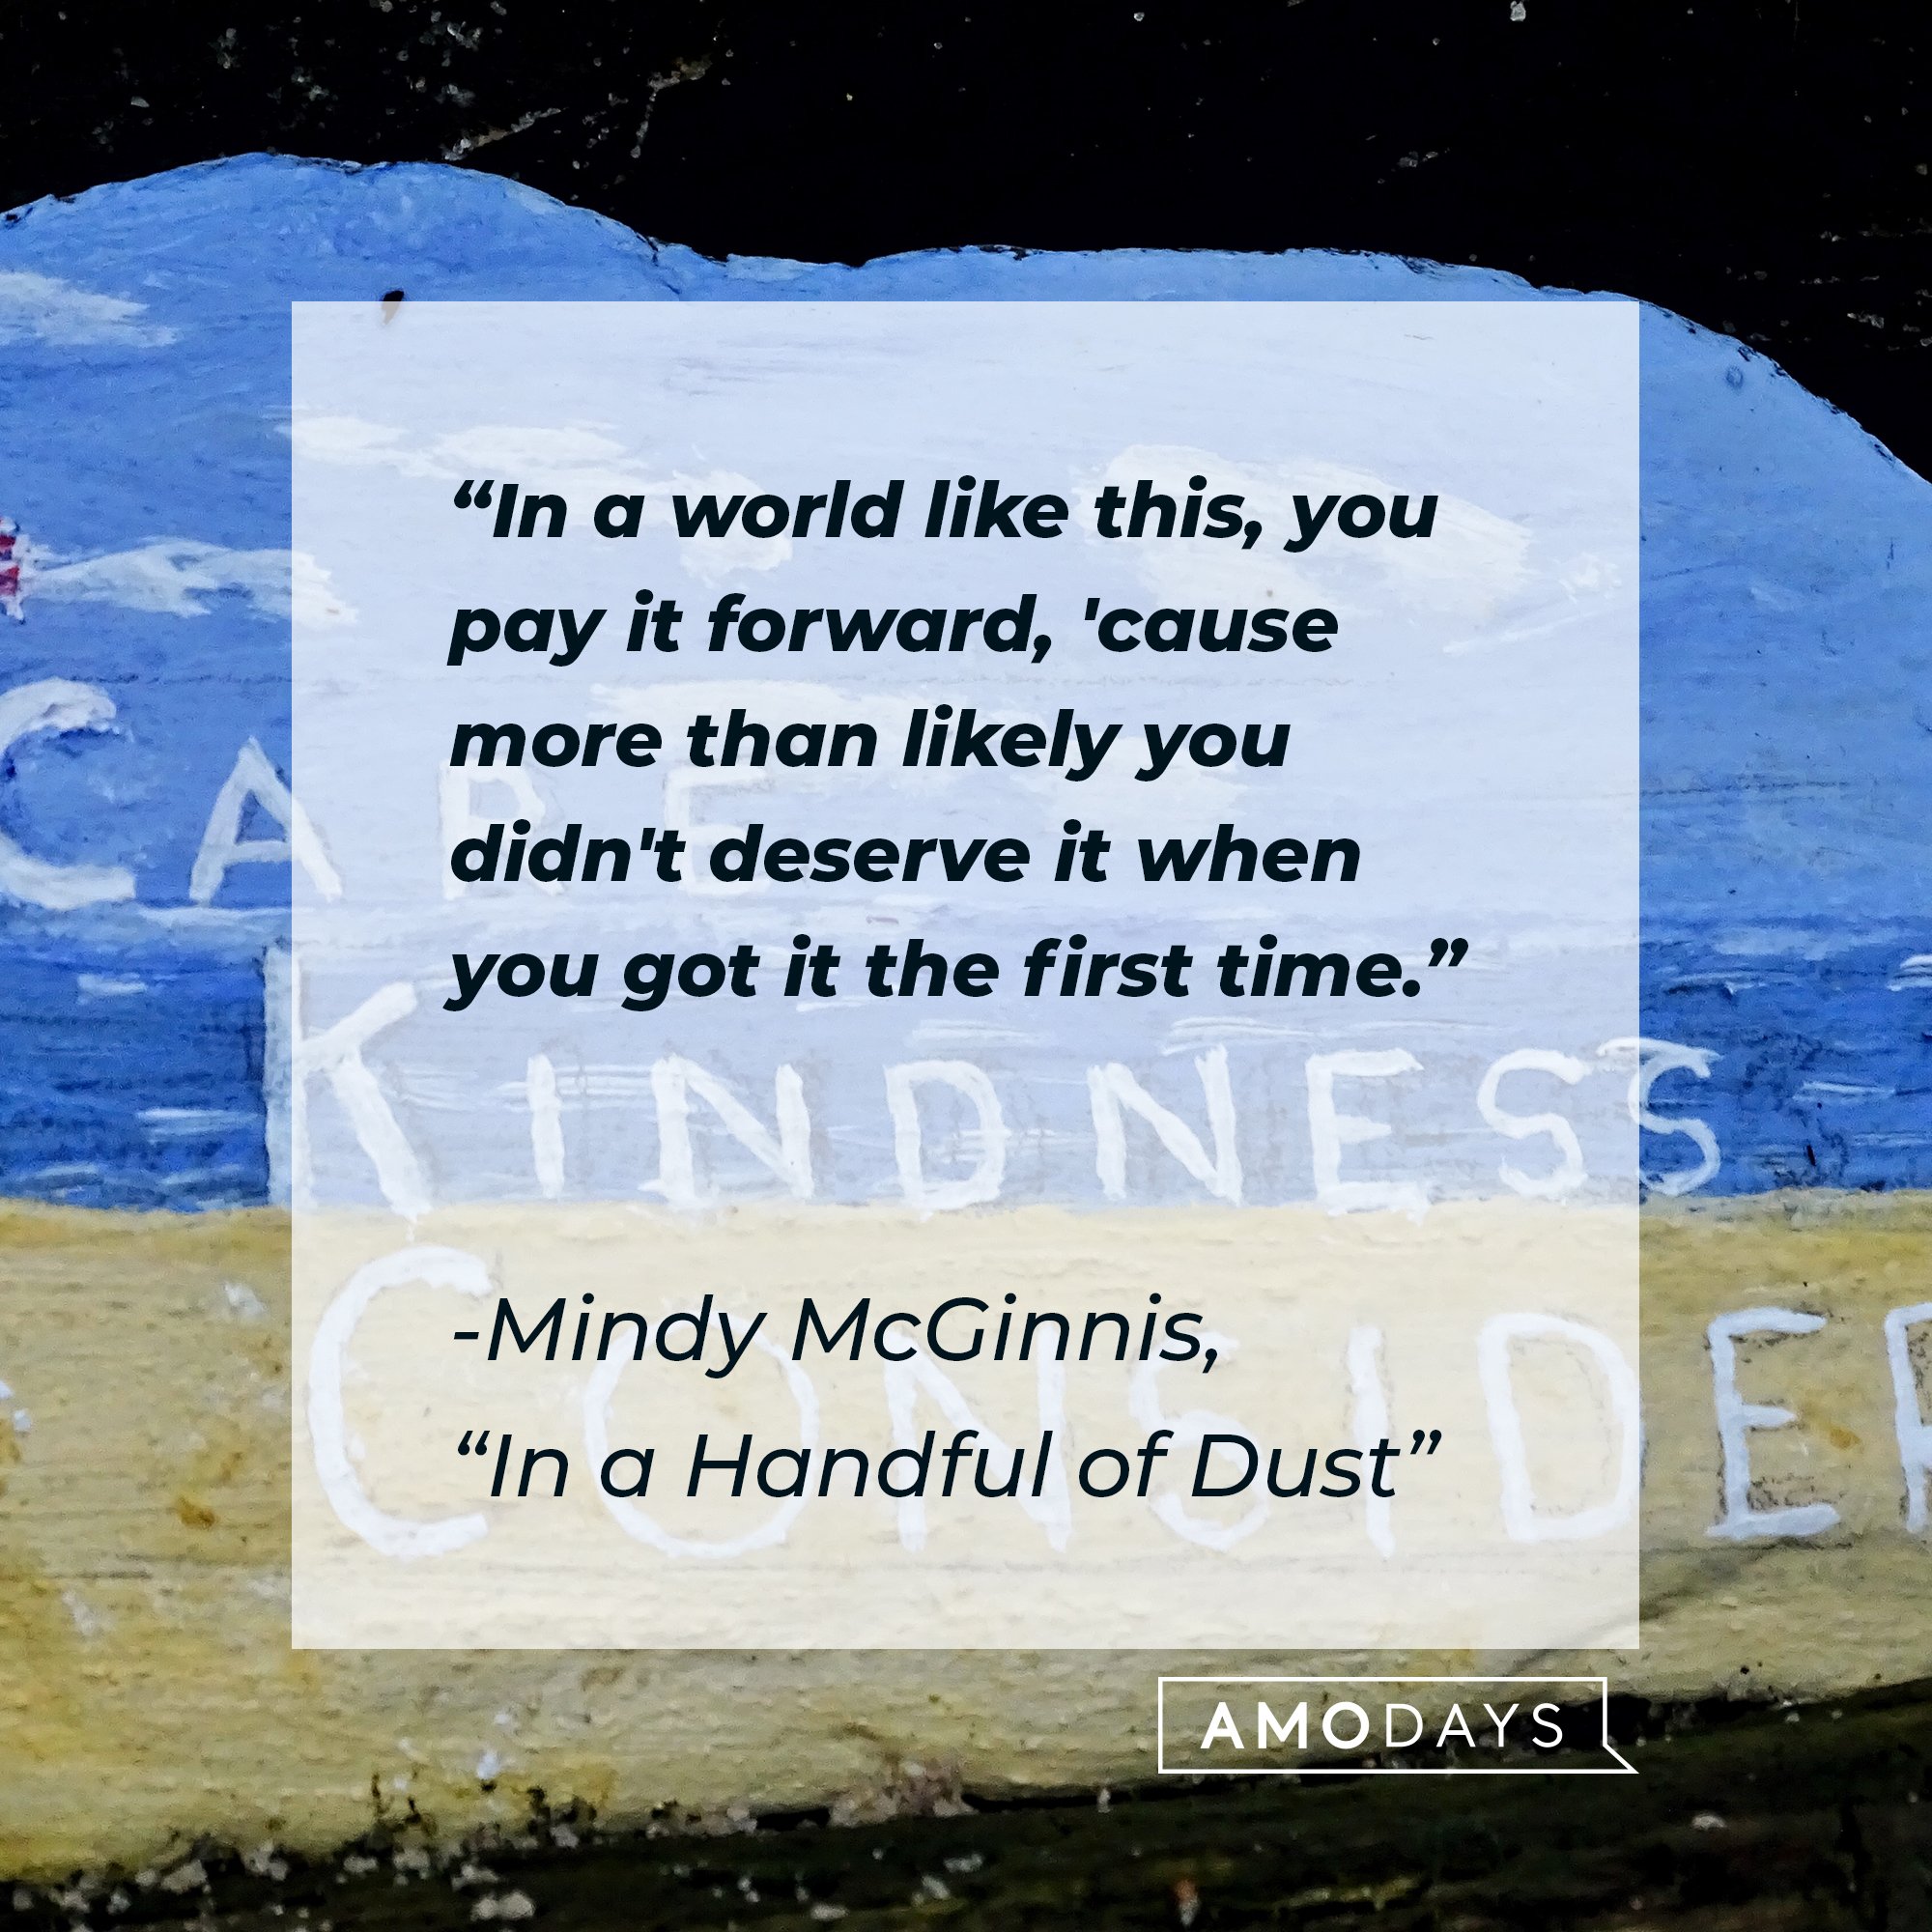 Mindy McGinnis’ quote from “In a Handful of Dust“: In a world like this, you pay it forward, 'cause more than likely you didn't deserve it when you got it the first time.” | Image: AmoDays 